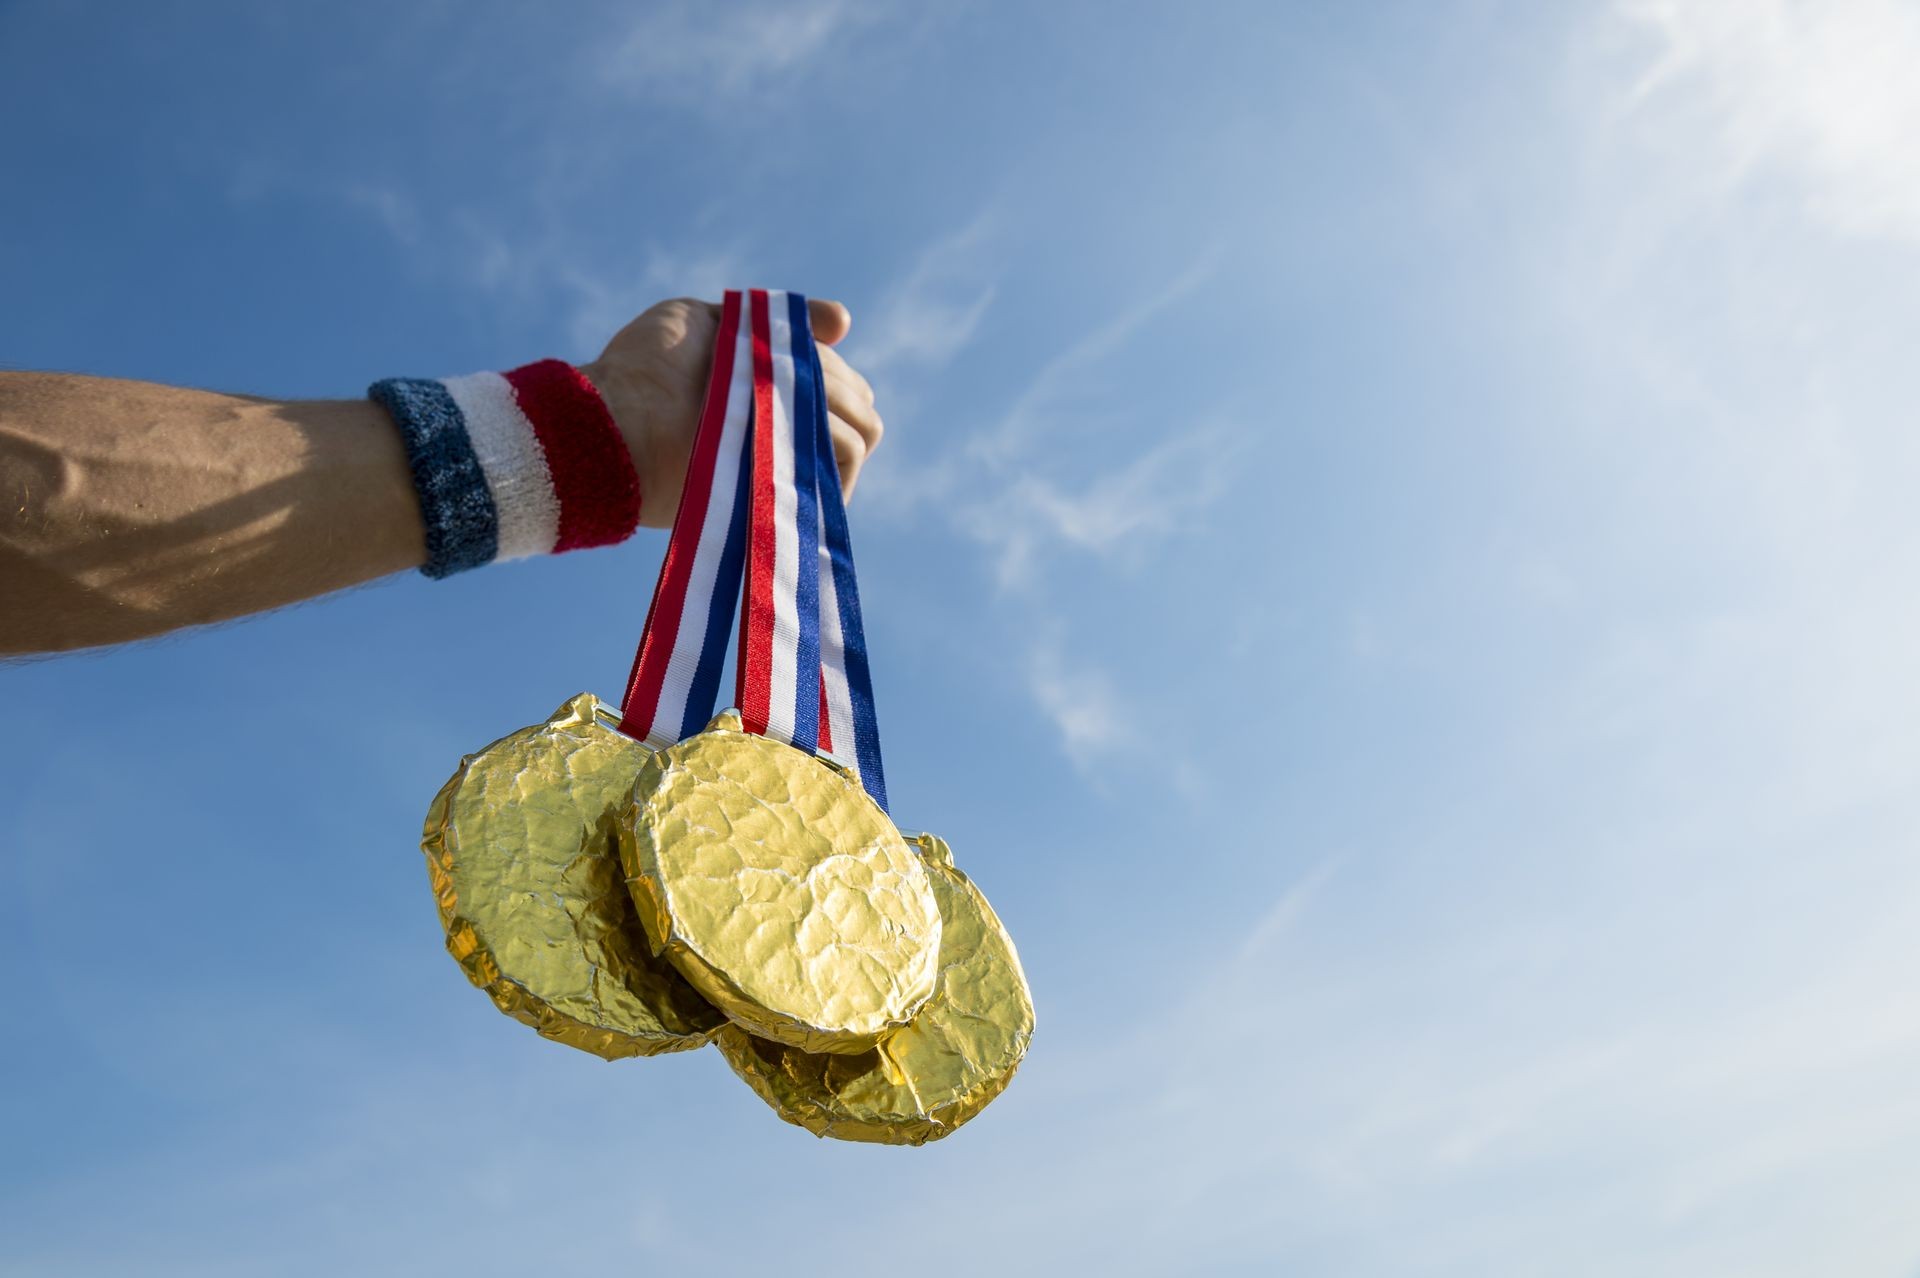 Hand of American athlete holding gold medals hanging from USA colors red, white, and blue ribbon against a bright blue sky background. Backlit with lens flare.